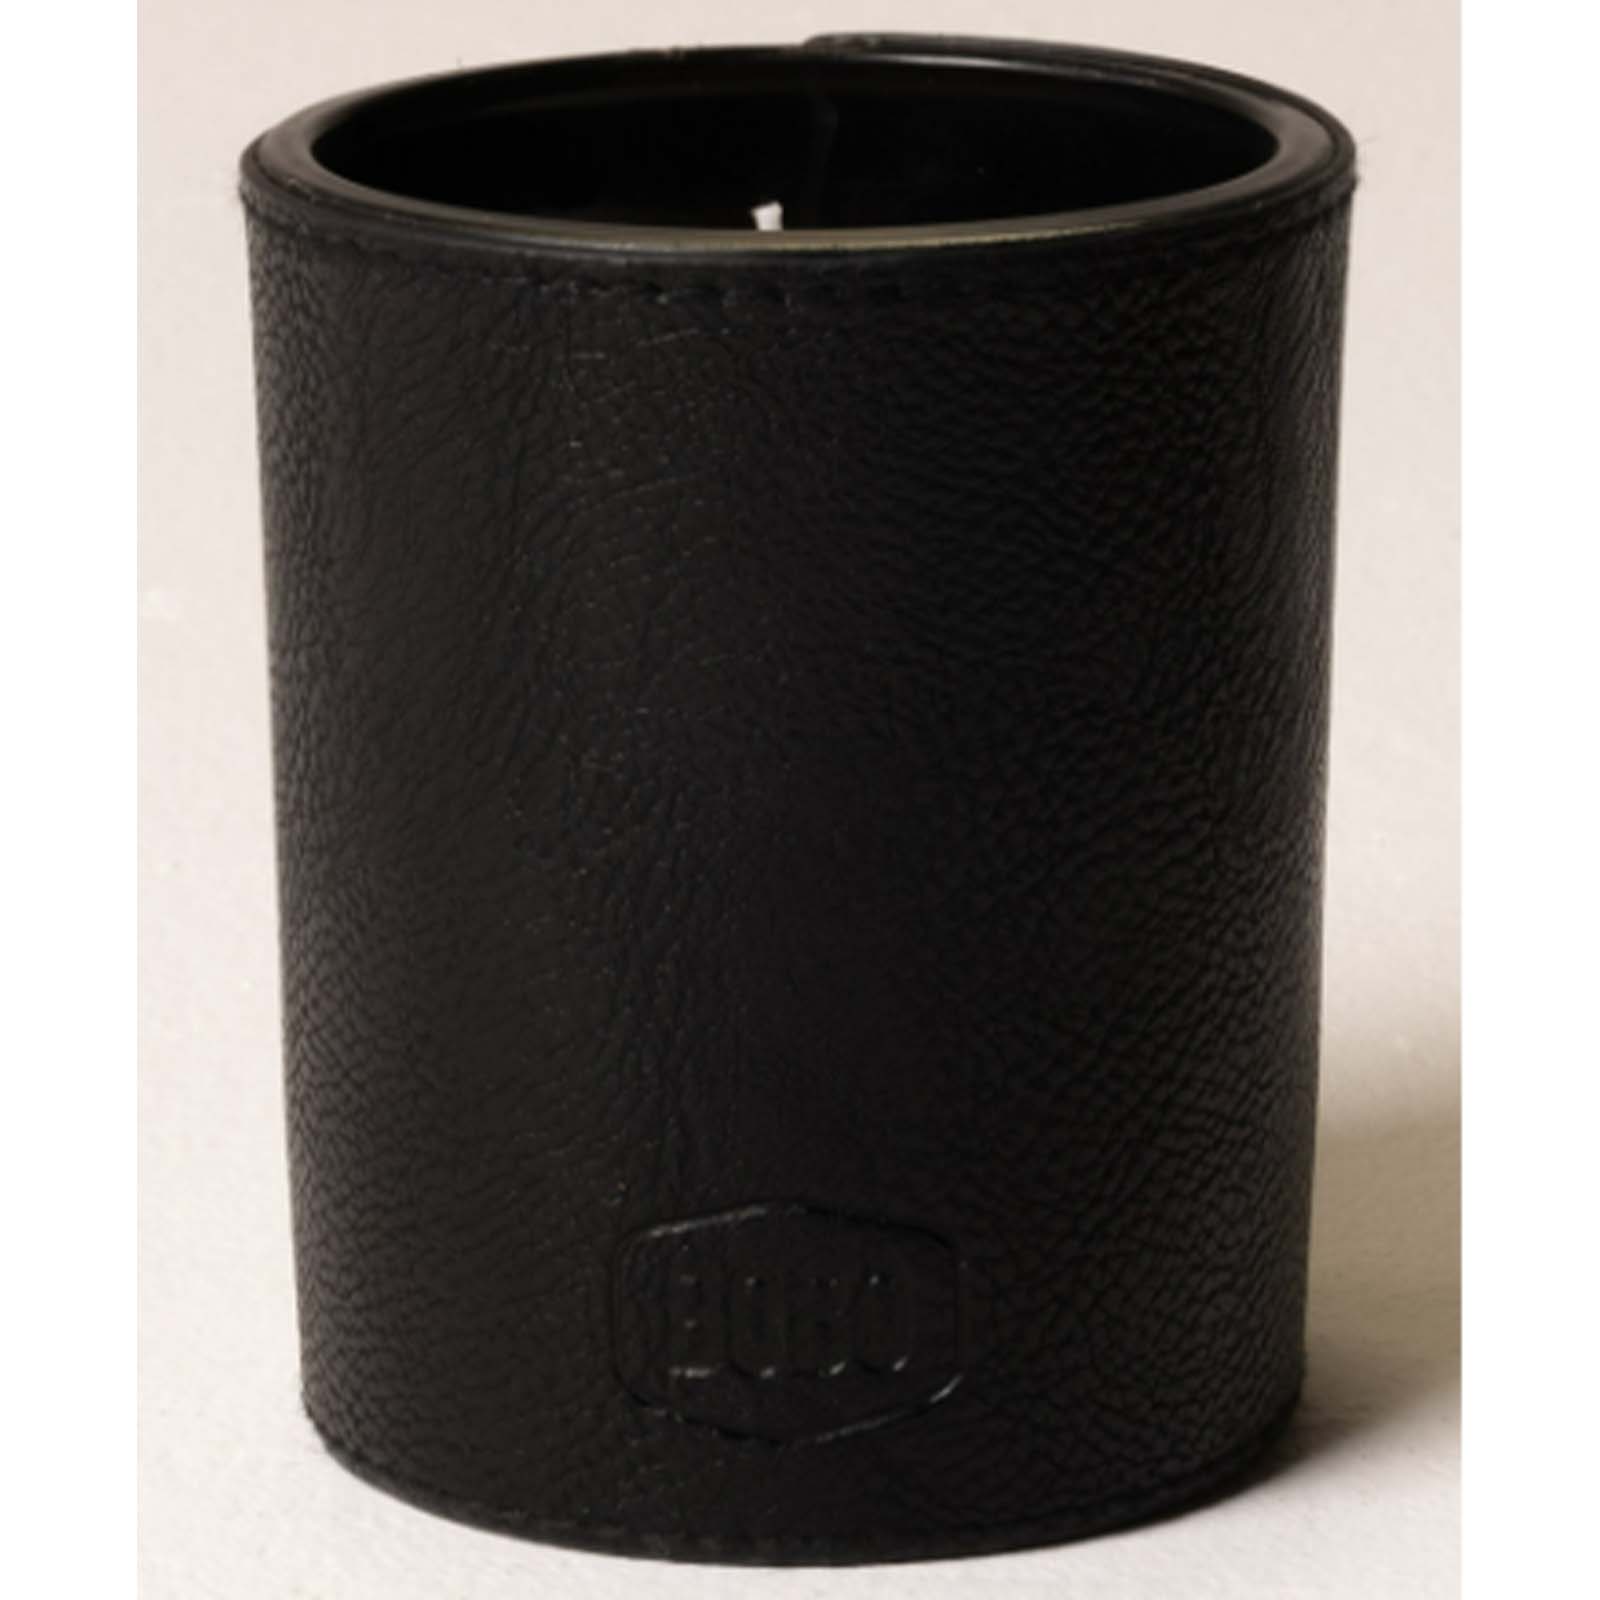 Bois and Tabac Black Candle